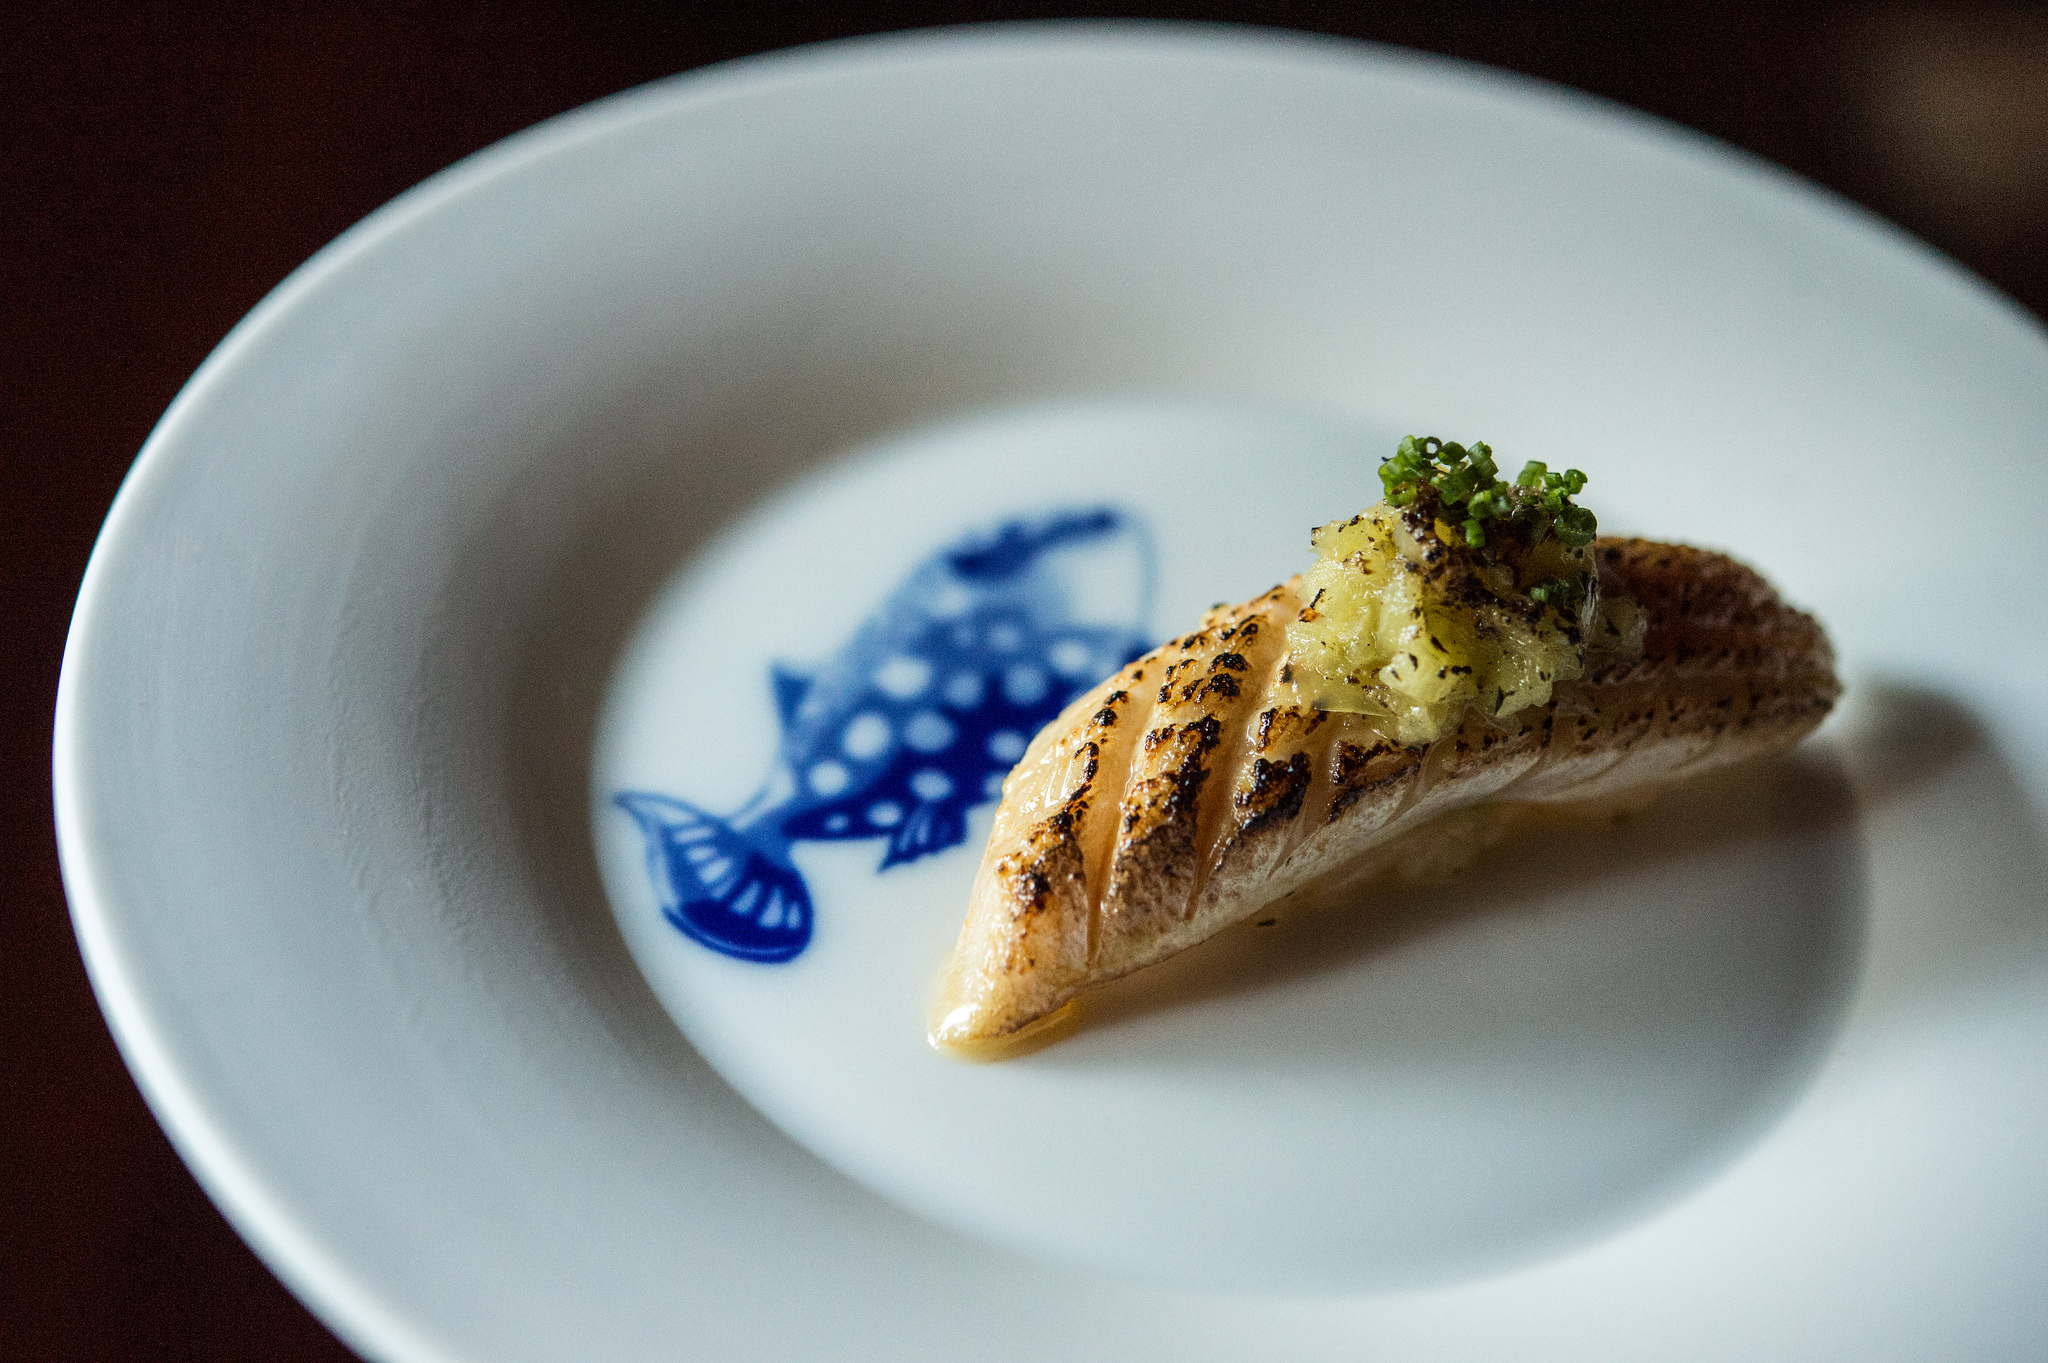 A white plate with a blue fish illustration holds a single piece if hamachi with banana pepper mousse.